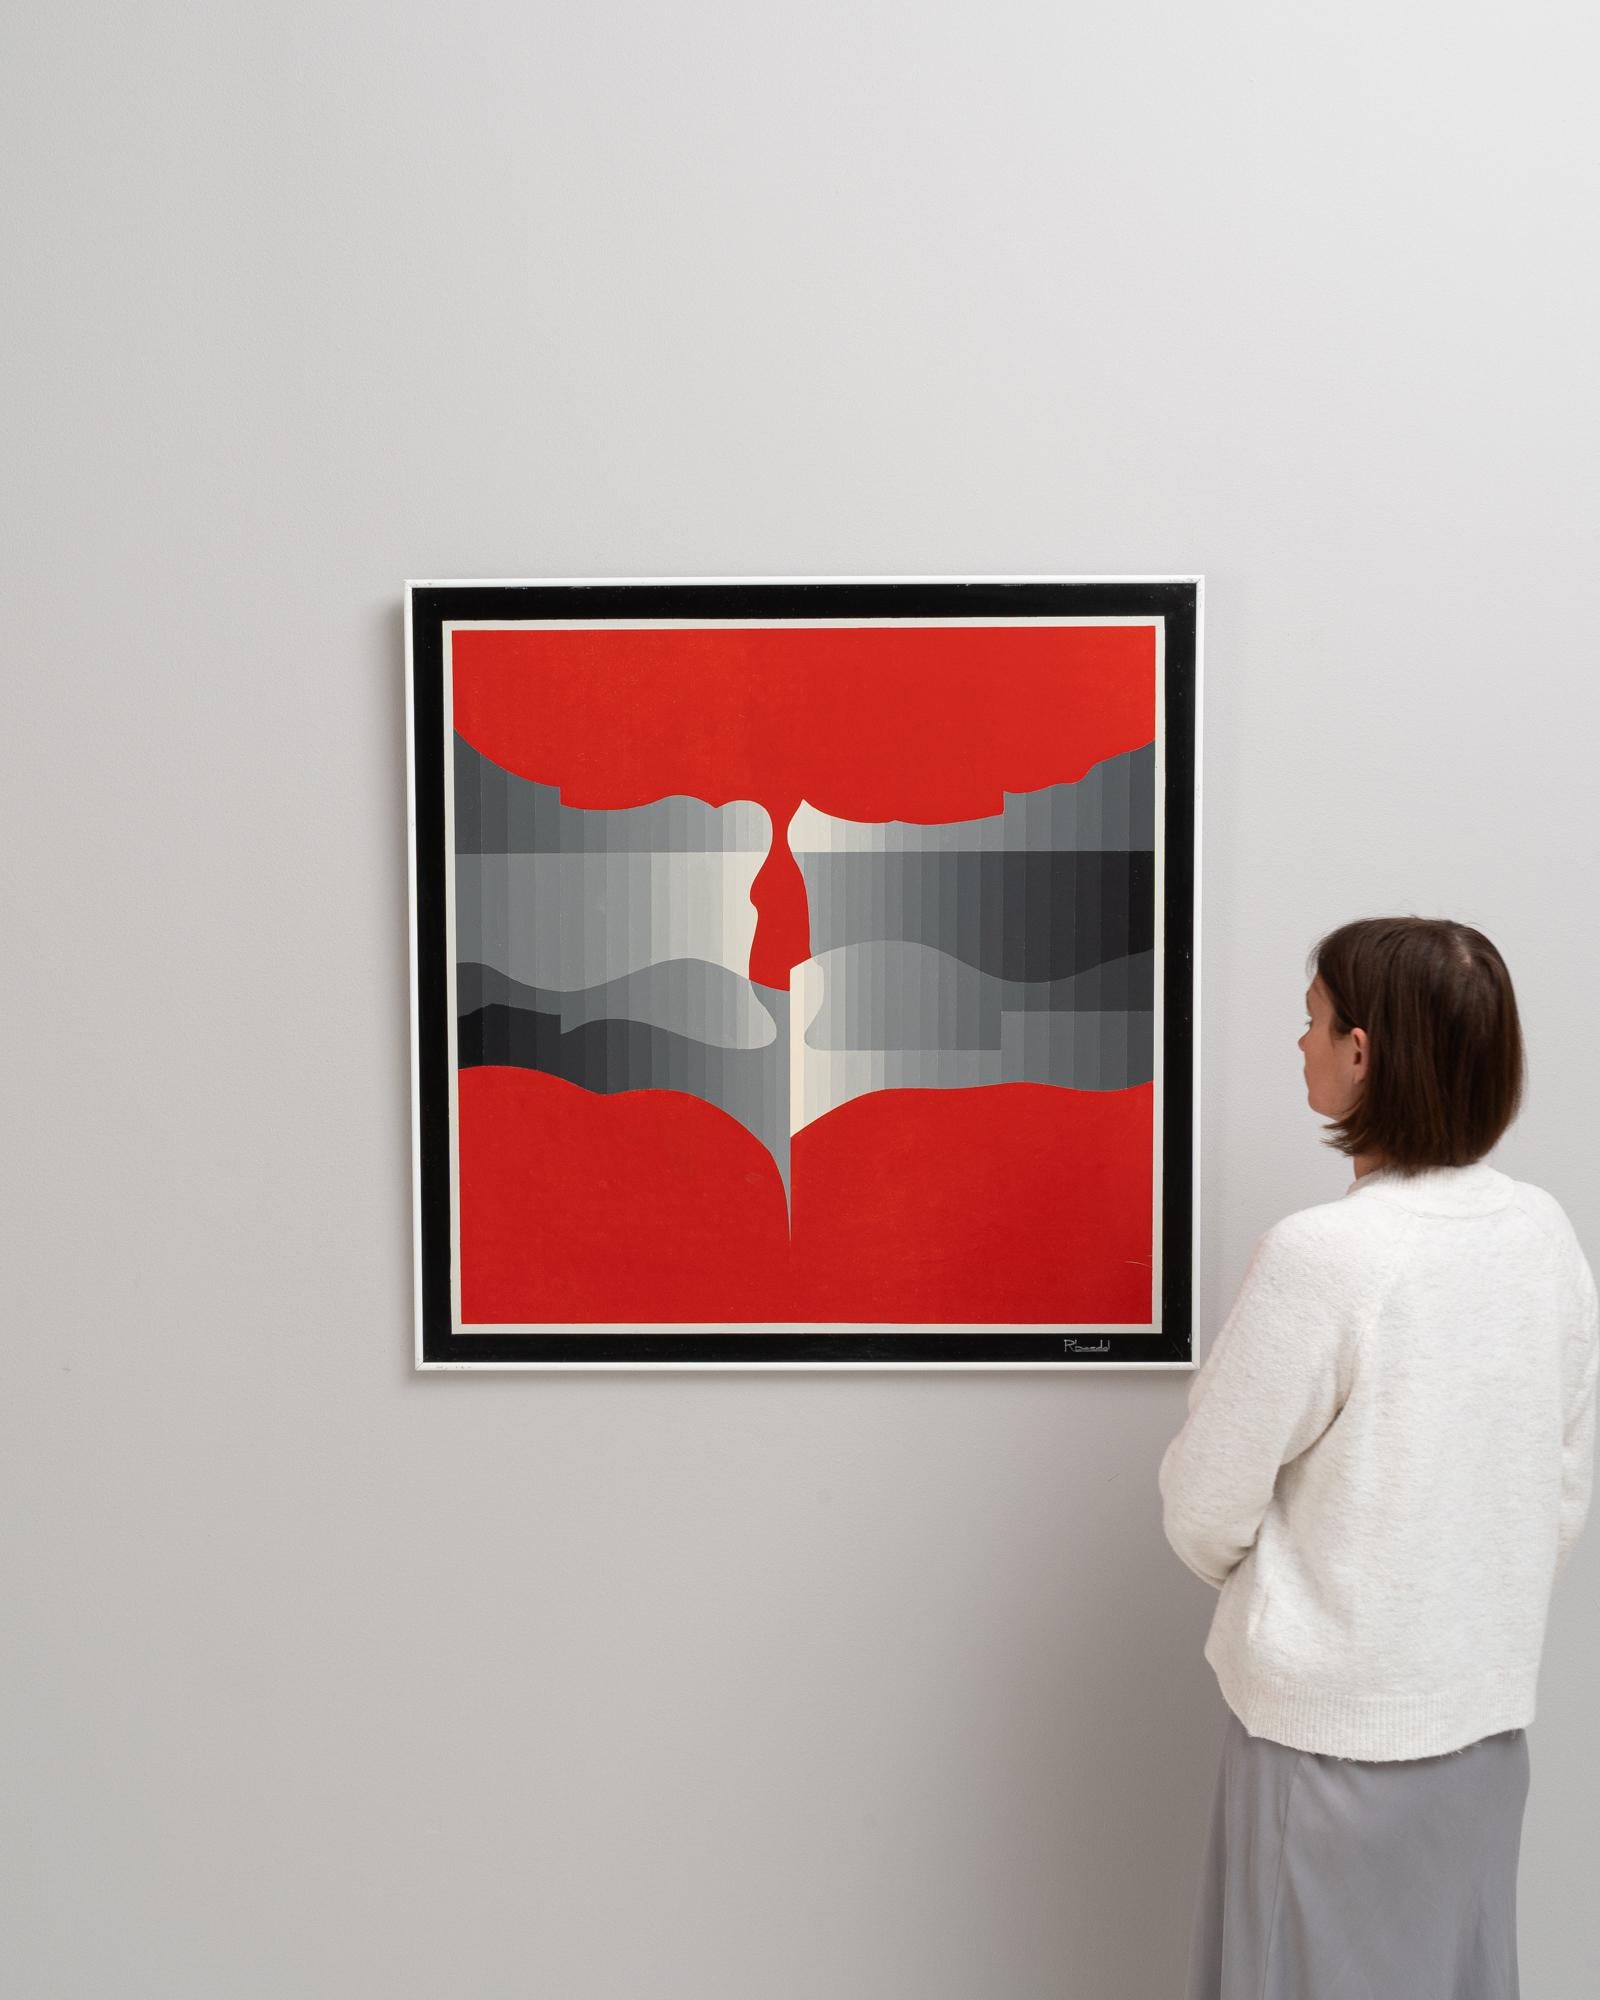 Discover the striking elegance of 20th century Belgian artwork with this captivating print by Rene Berdal. Framed in sleek metal, this piece showcases Berdal's unique style through its bold red and subdued gray tones, which are artfully segmented to